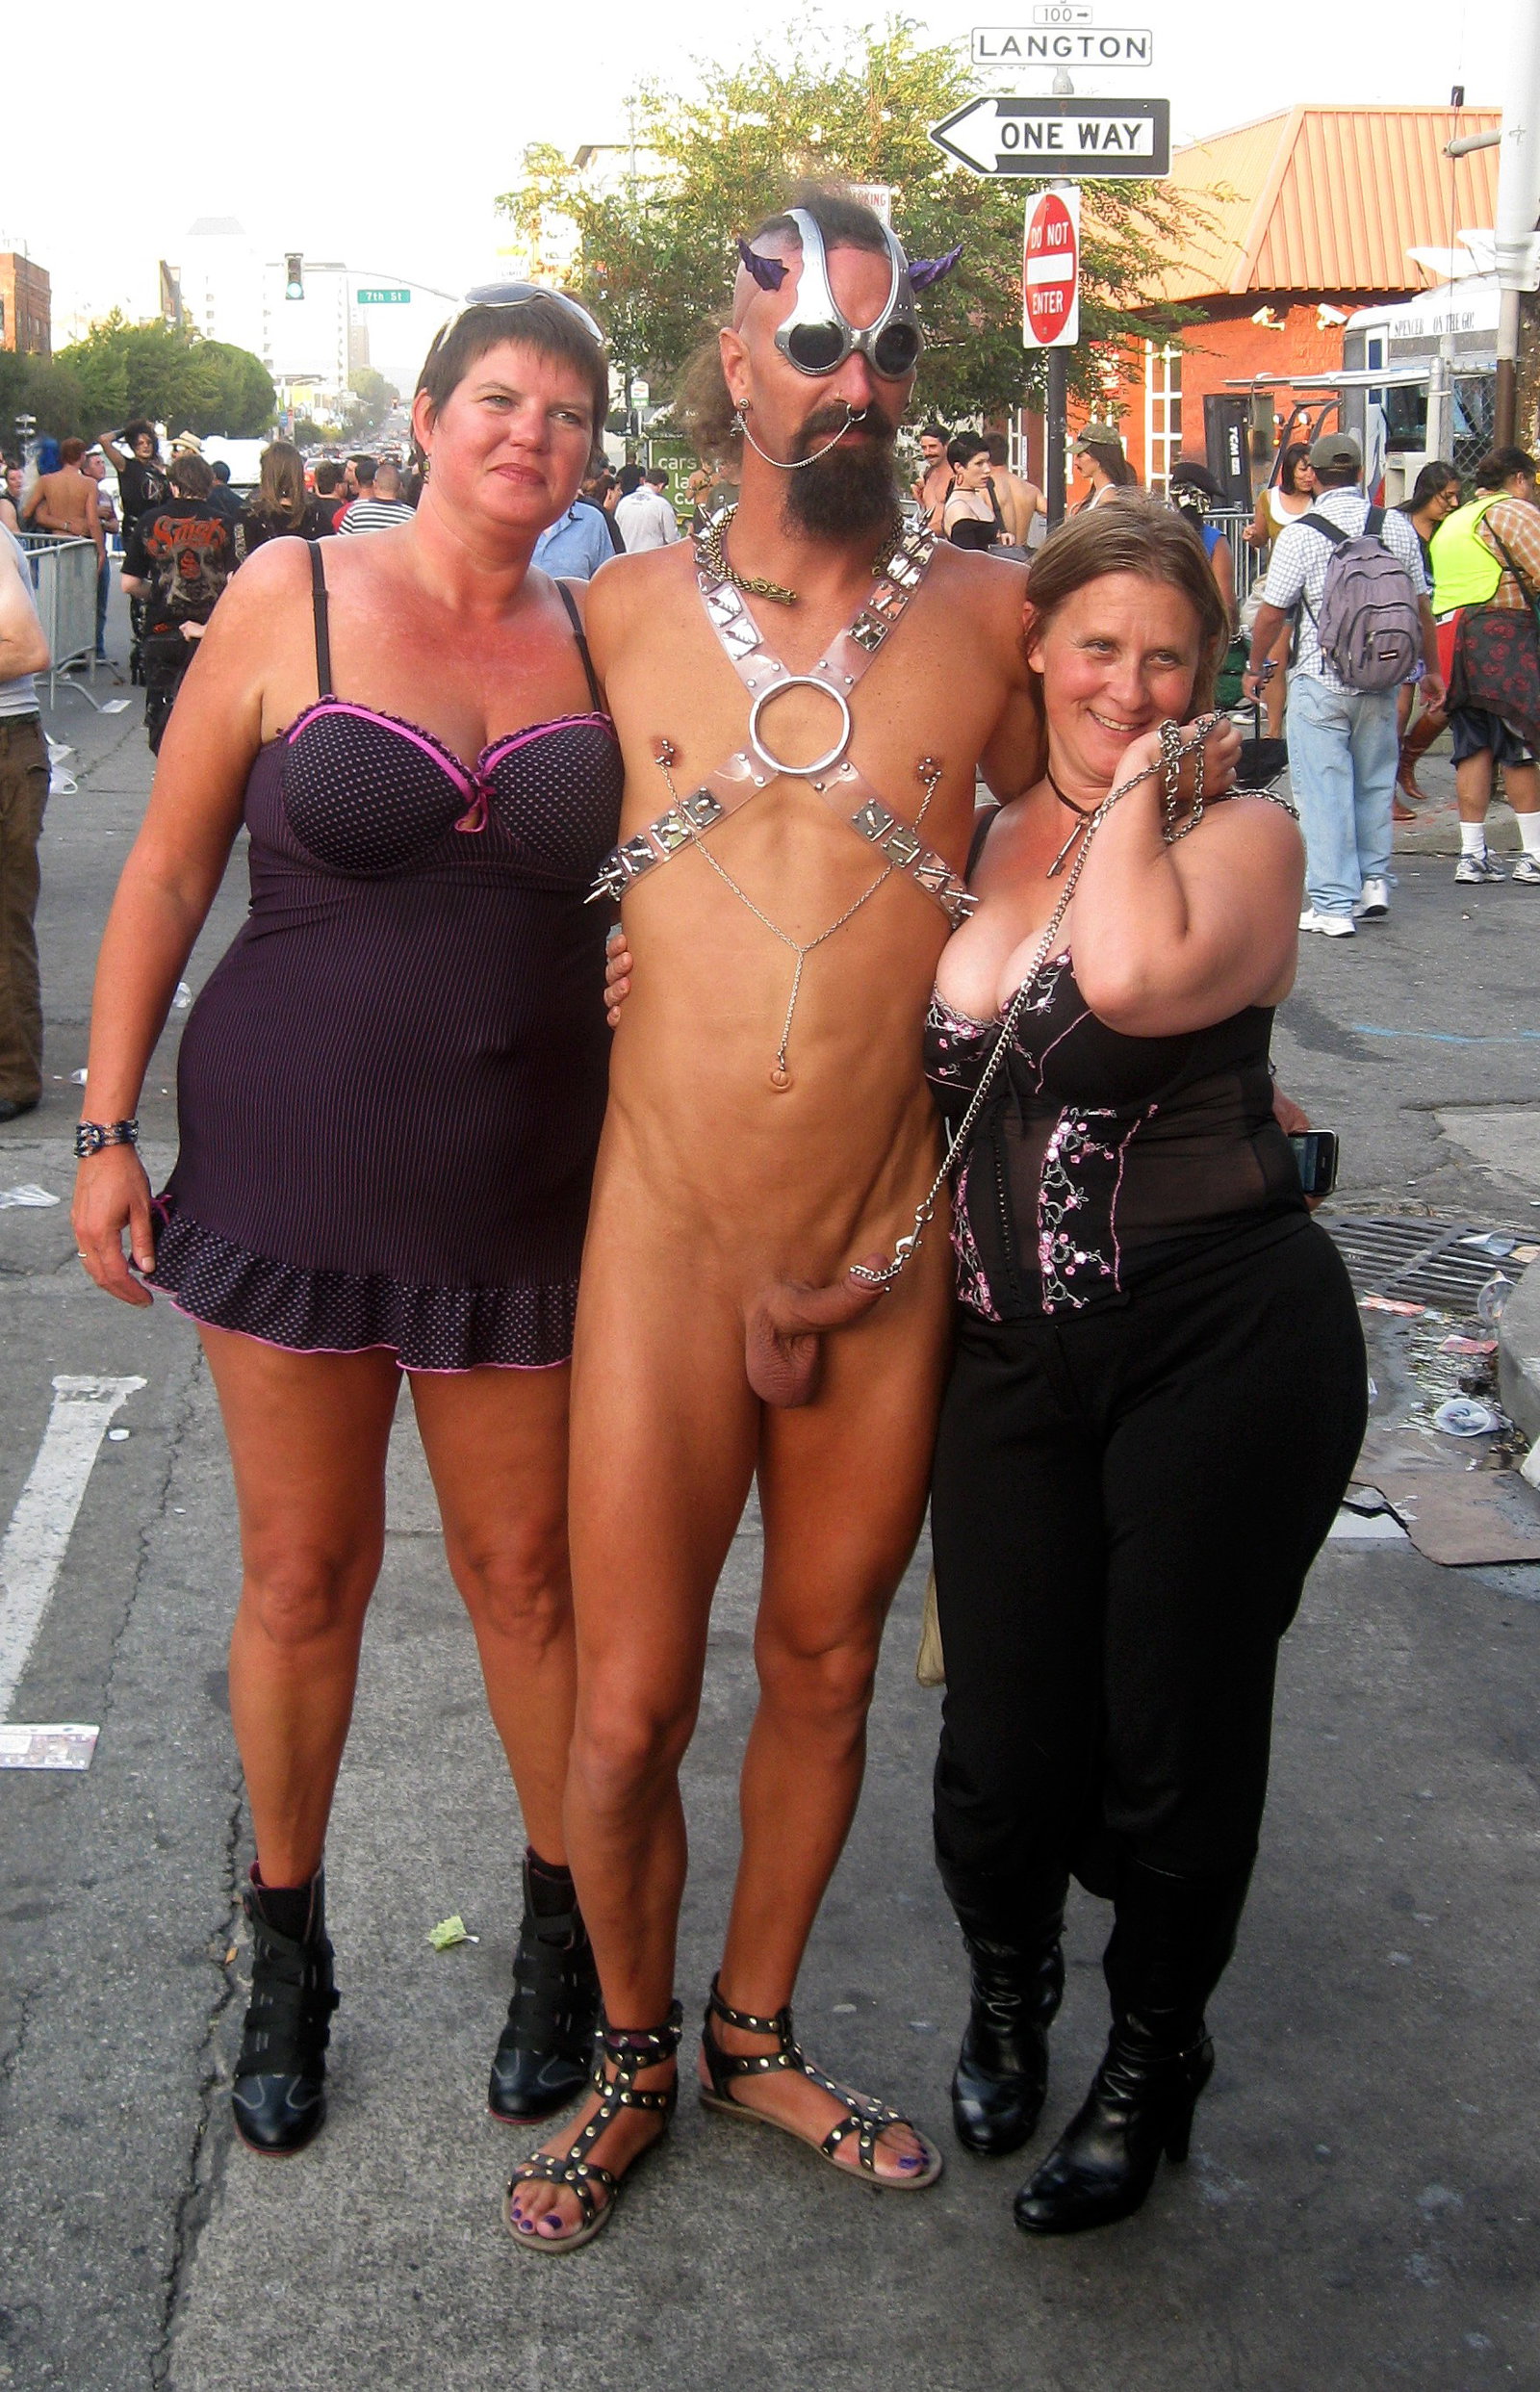 Photo by AllThingsCFNM with the username @AllThingsCFNM, posted on August 5, 2016 and the text says 'BBWs keeping him on a leash.

Get your CFNM updates @ www.AllThingsCFNM.net #CFNM  #nude  #in  #public  #bbw  #public  #exhibitionism  #folsom  #st.  #fair'